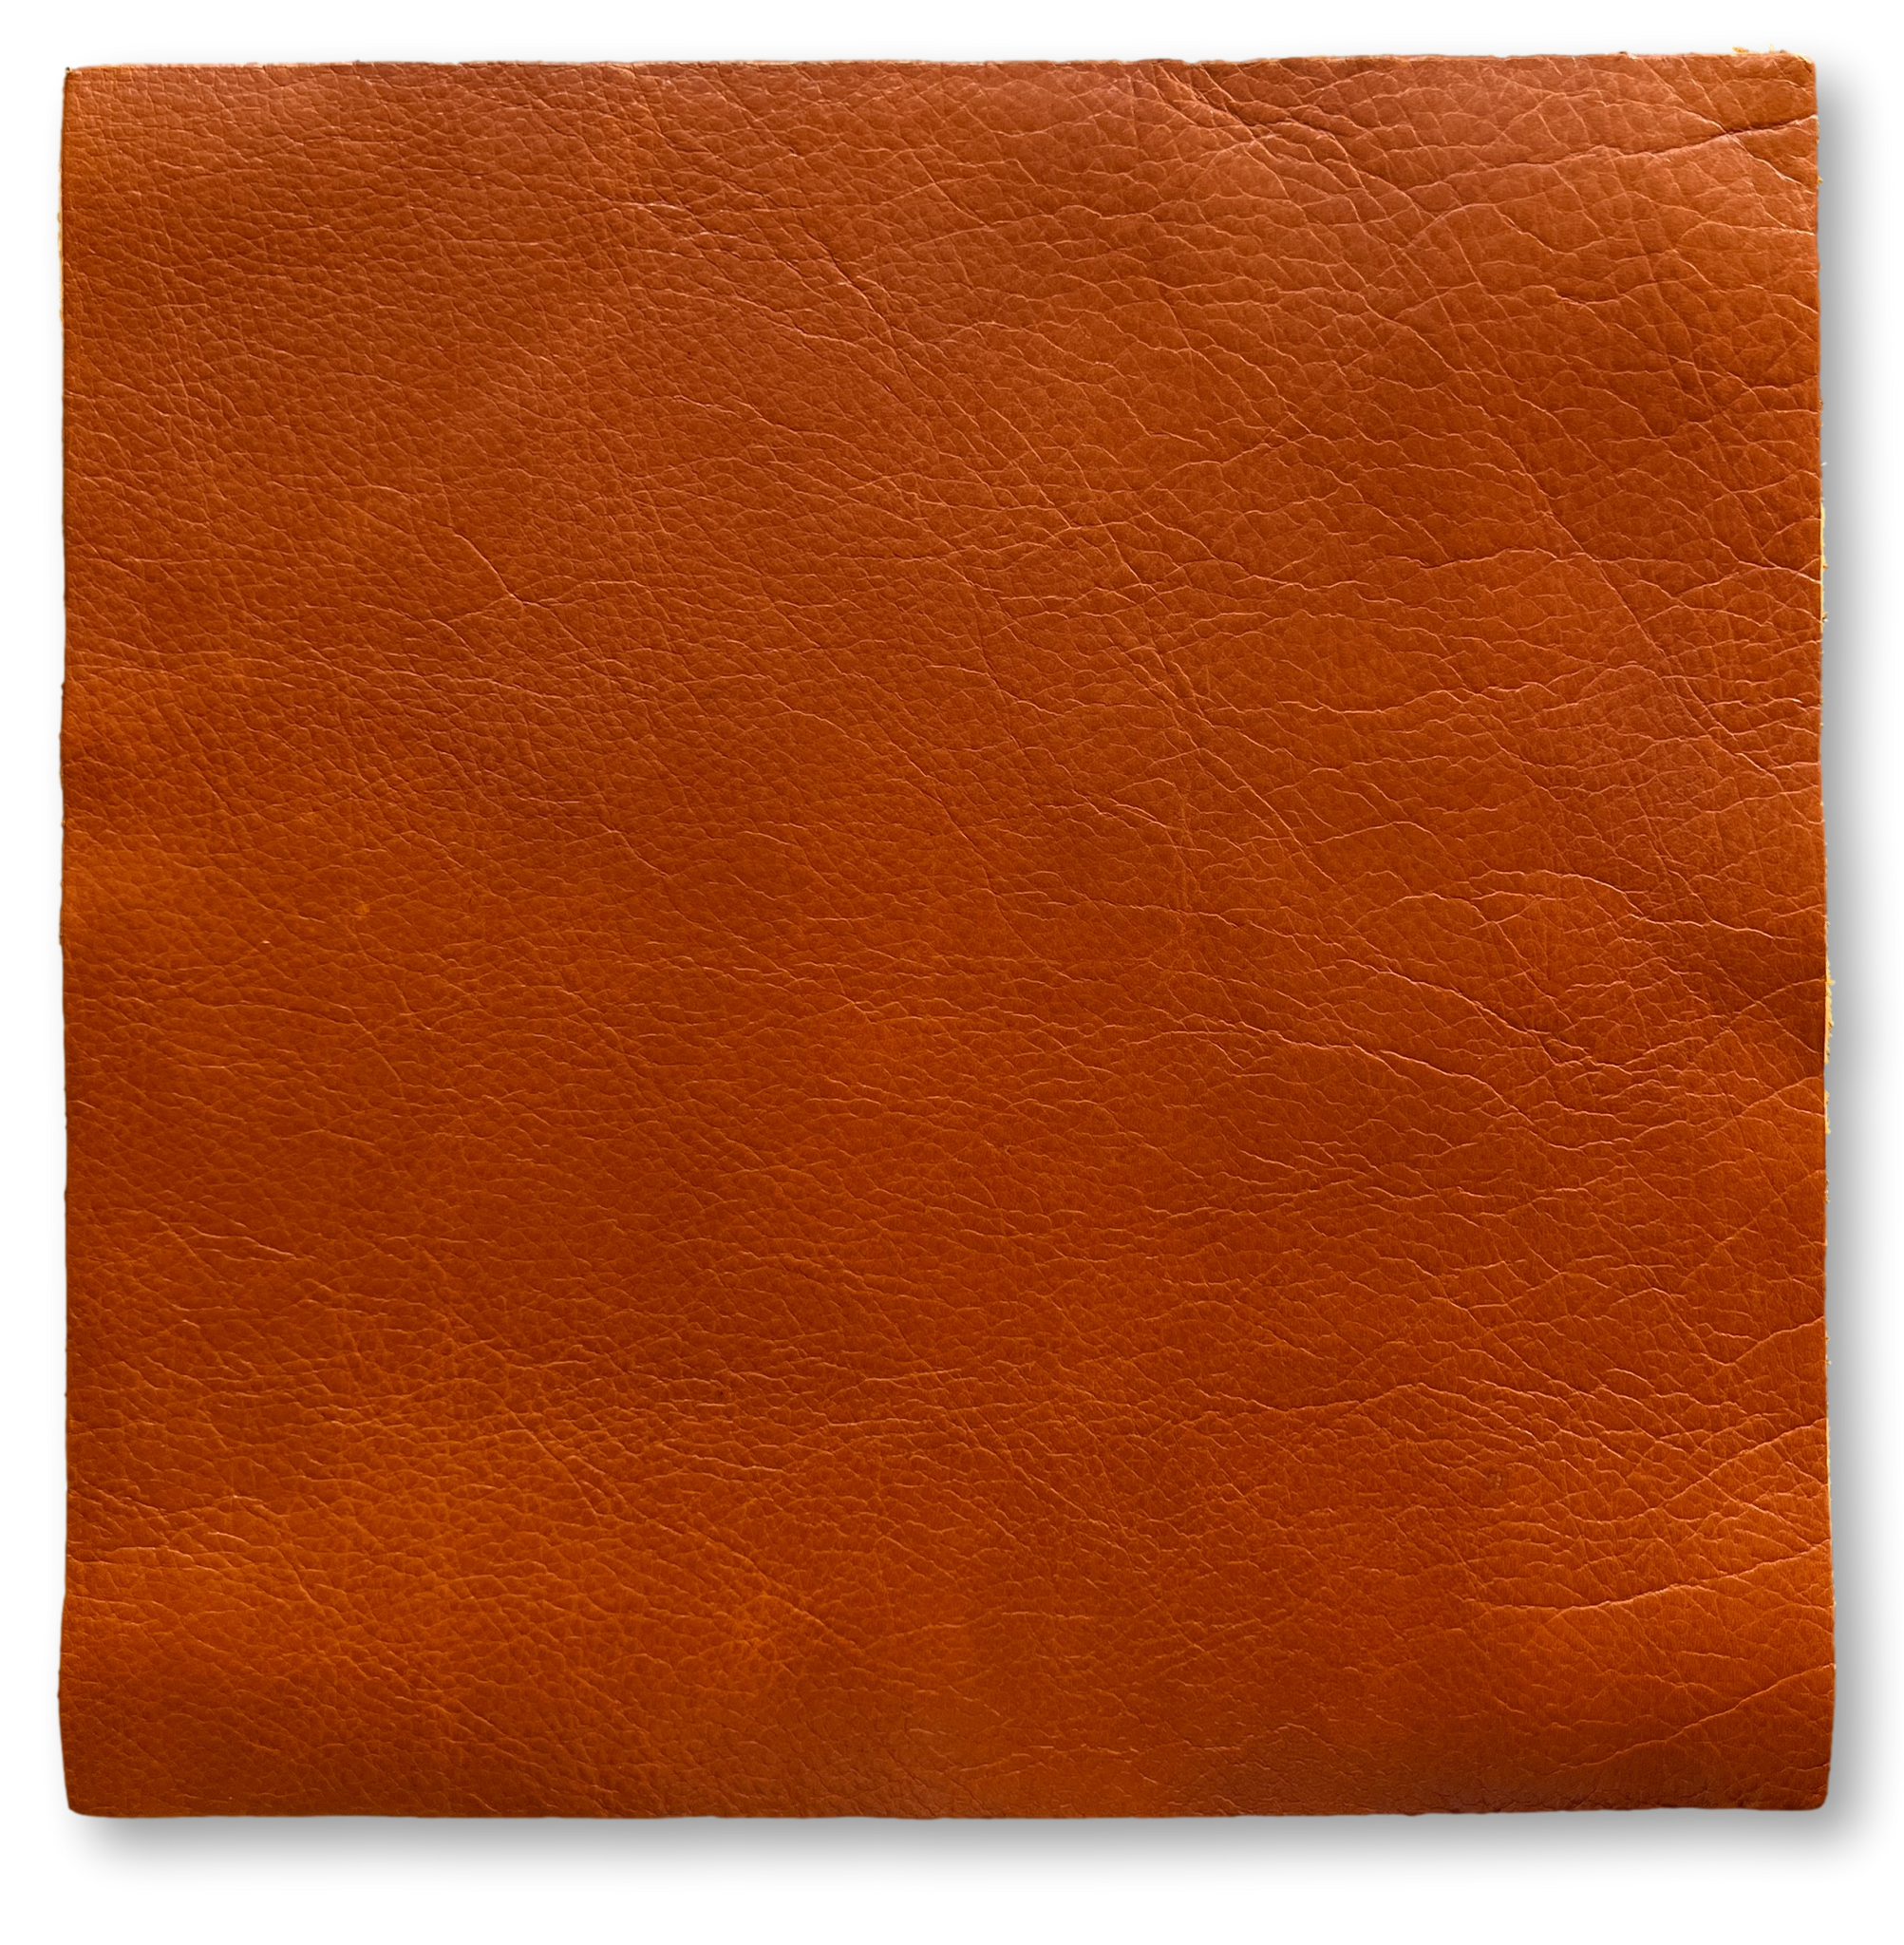 Whiskey Distressed Cowhide Leather: 12" x 12" Pre-Cut Squares